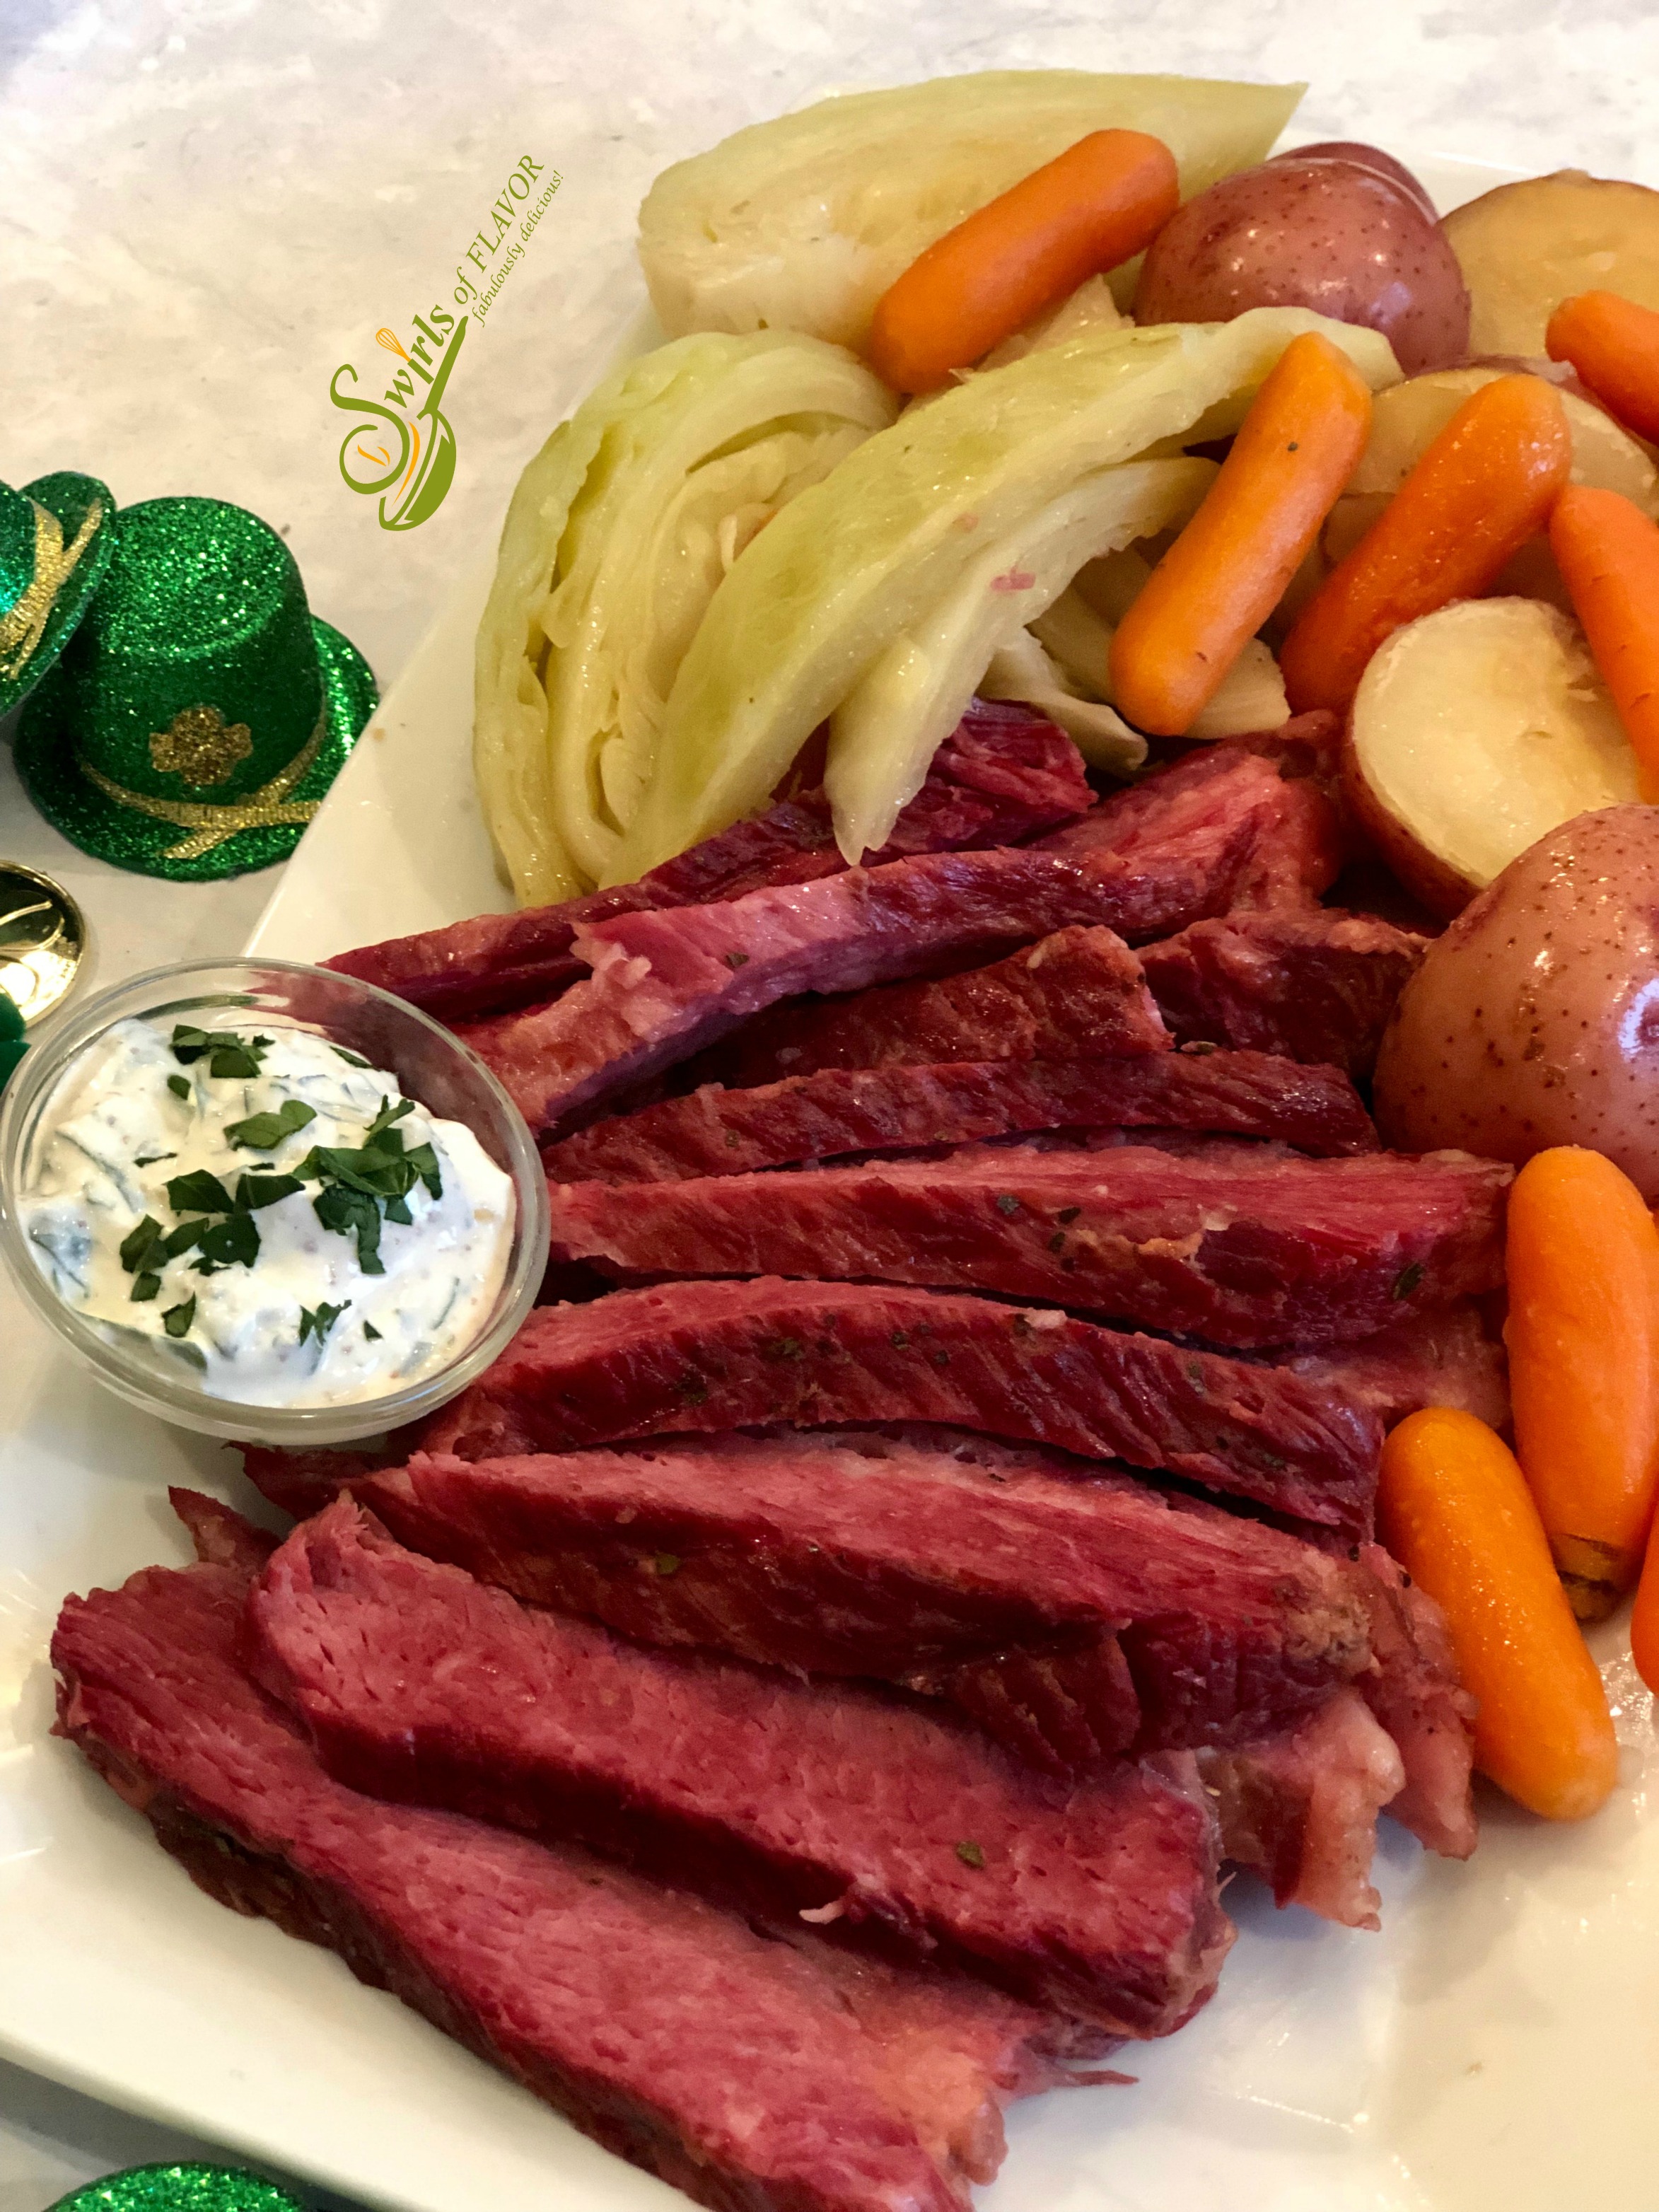 instant pot corned beef and cabbage with horseradish Dijon cream sauce in small bowl